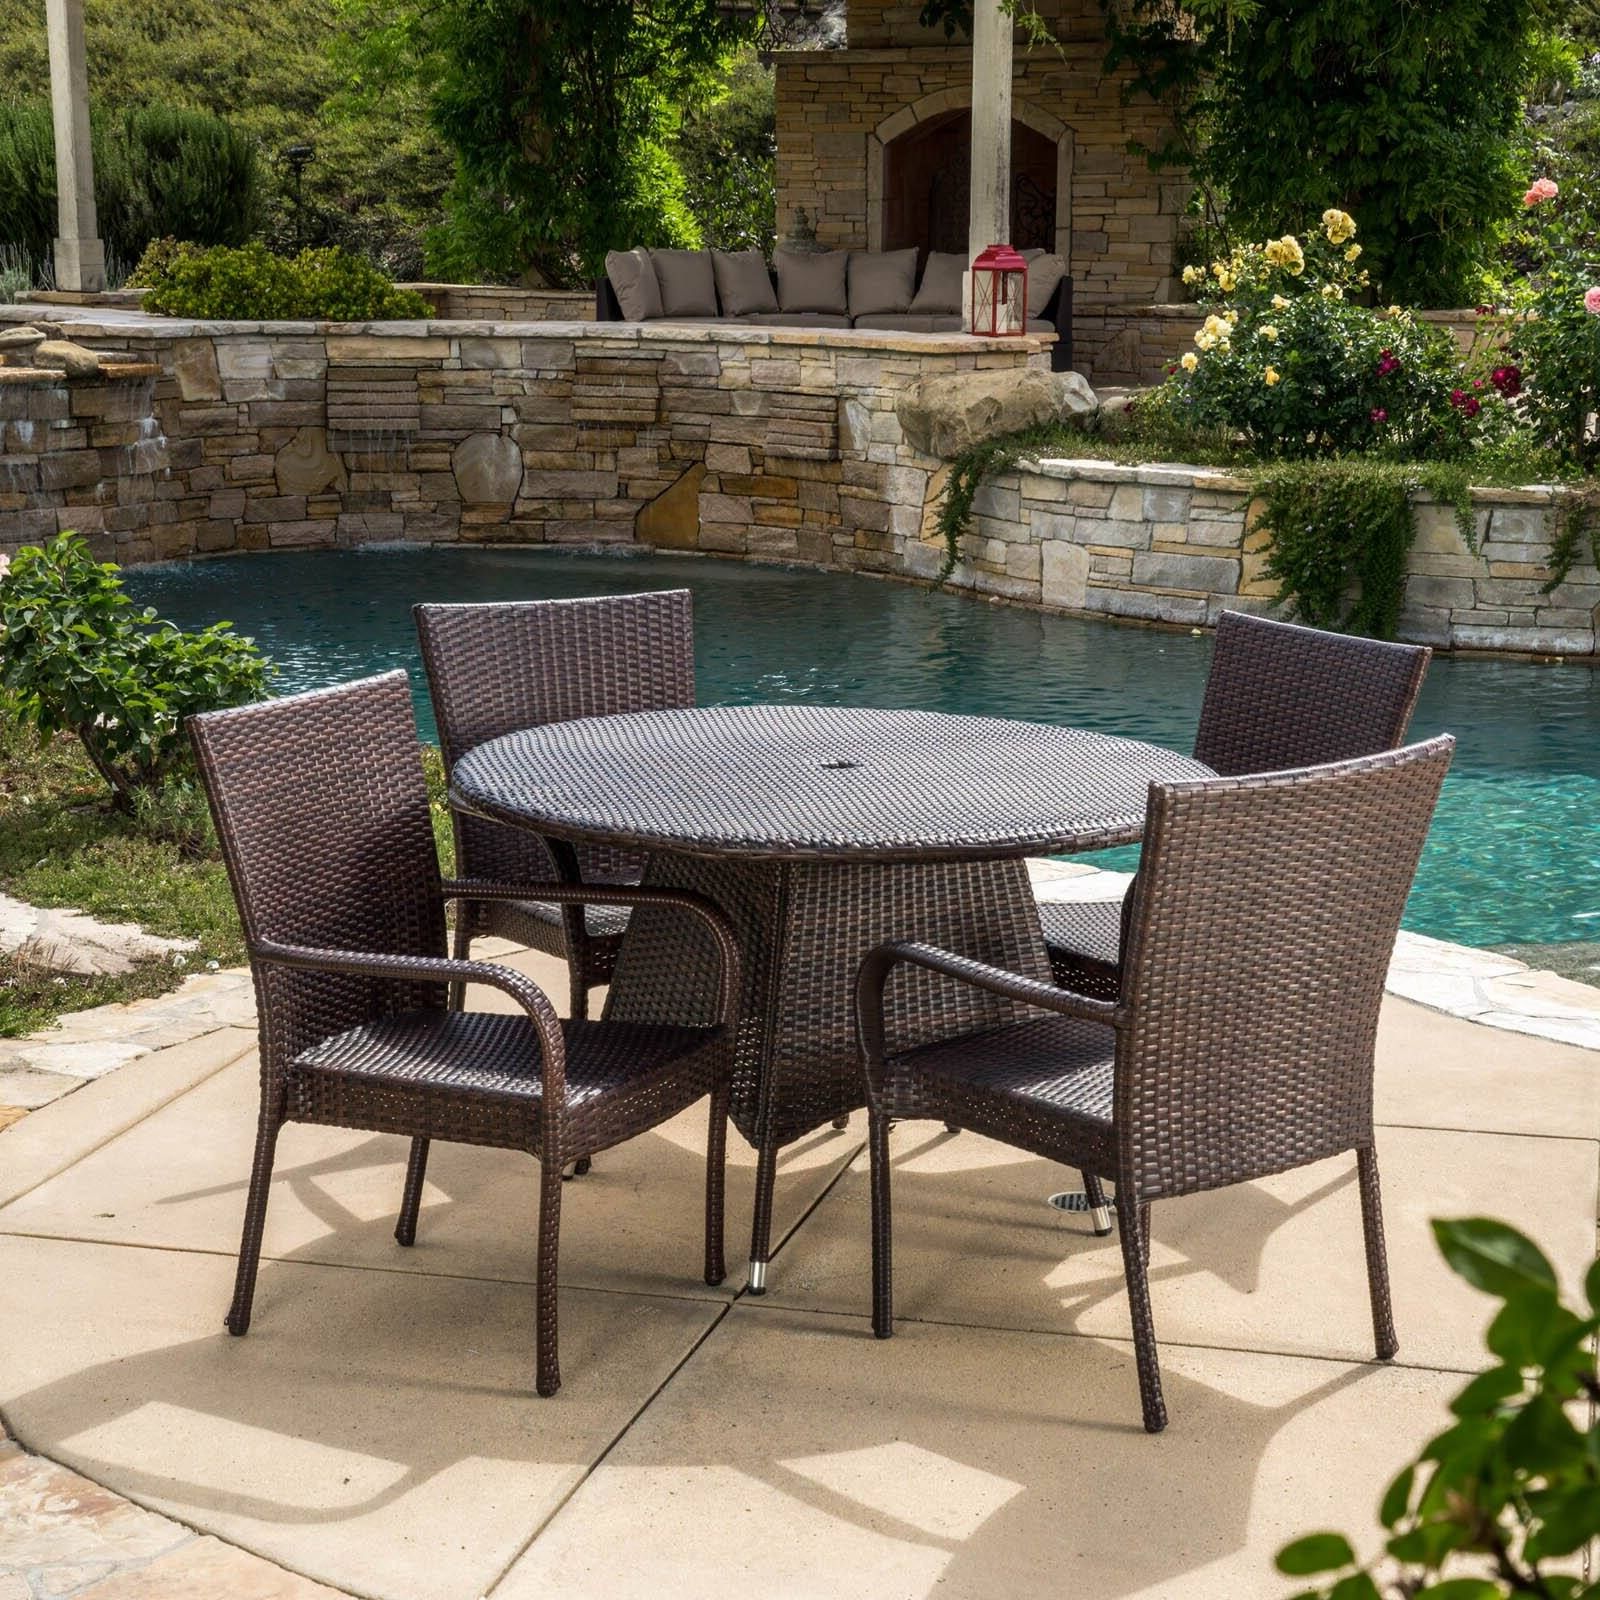 Well Known Potter Wicker 5 Piece Round Patio Dining Set – Walmart – Walmart Regarding Wicker 5 Piece Round Patio Dining Sets (View 1 of 15)